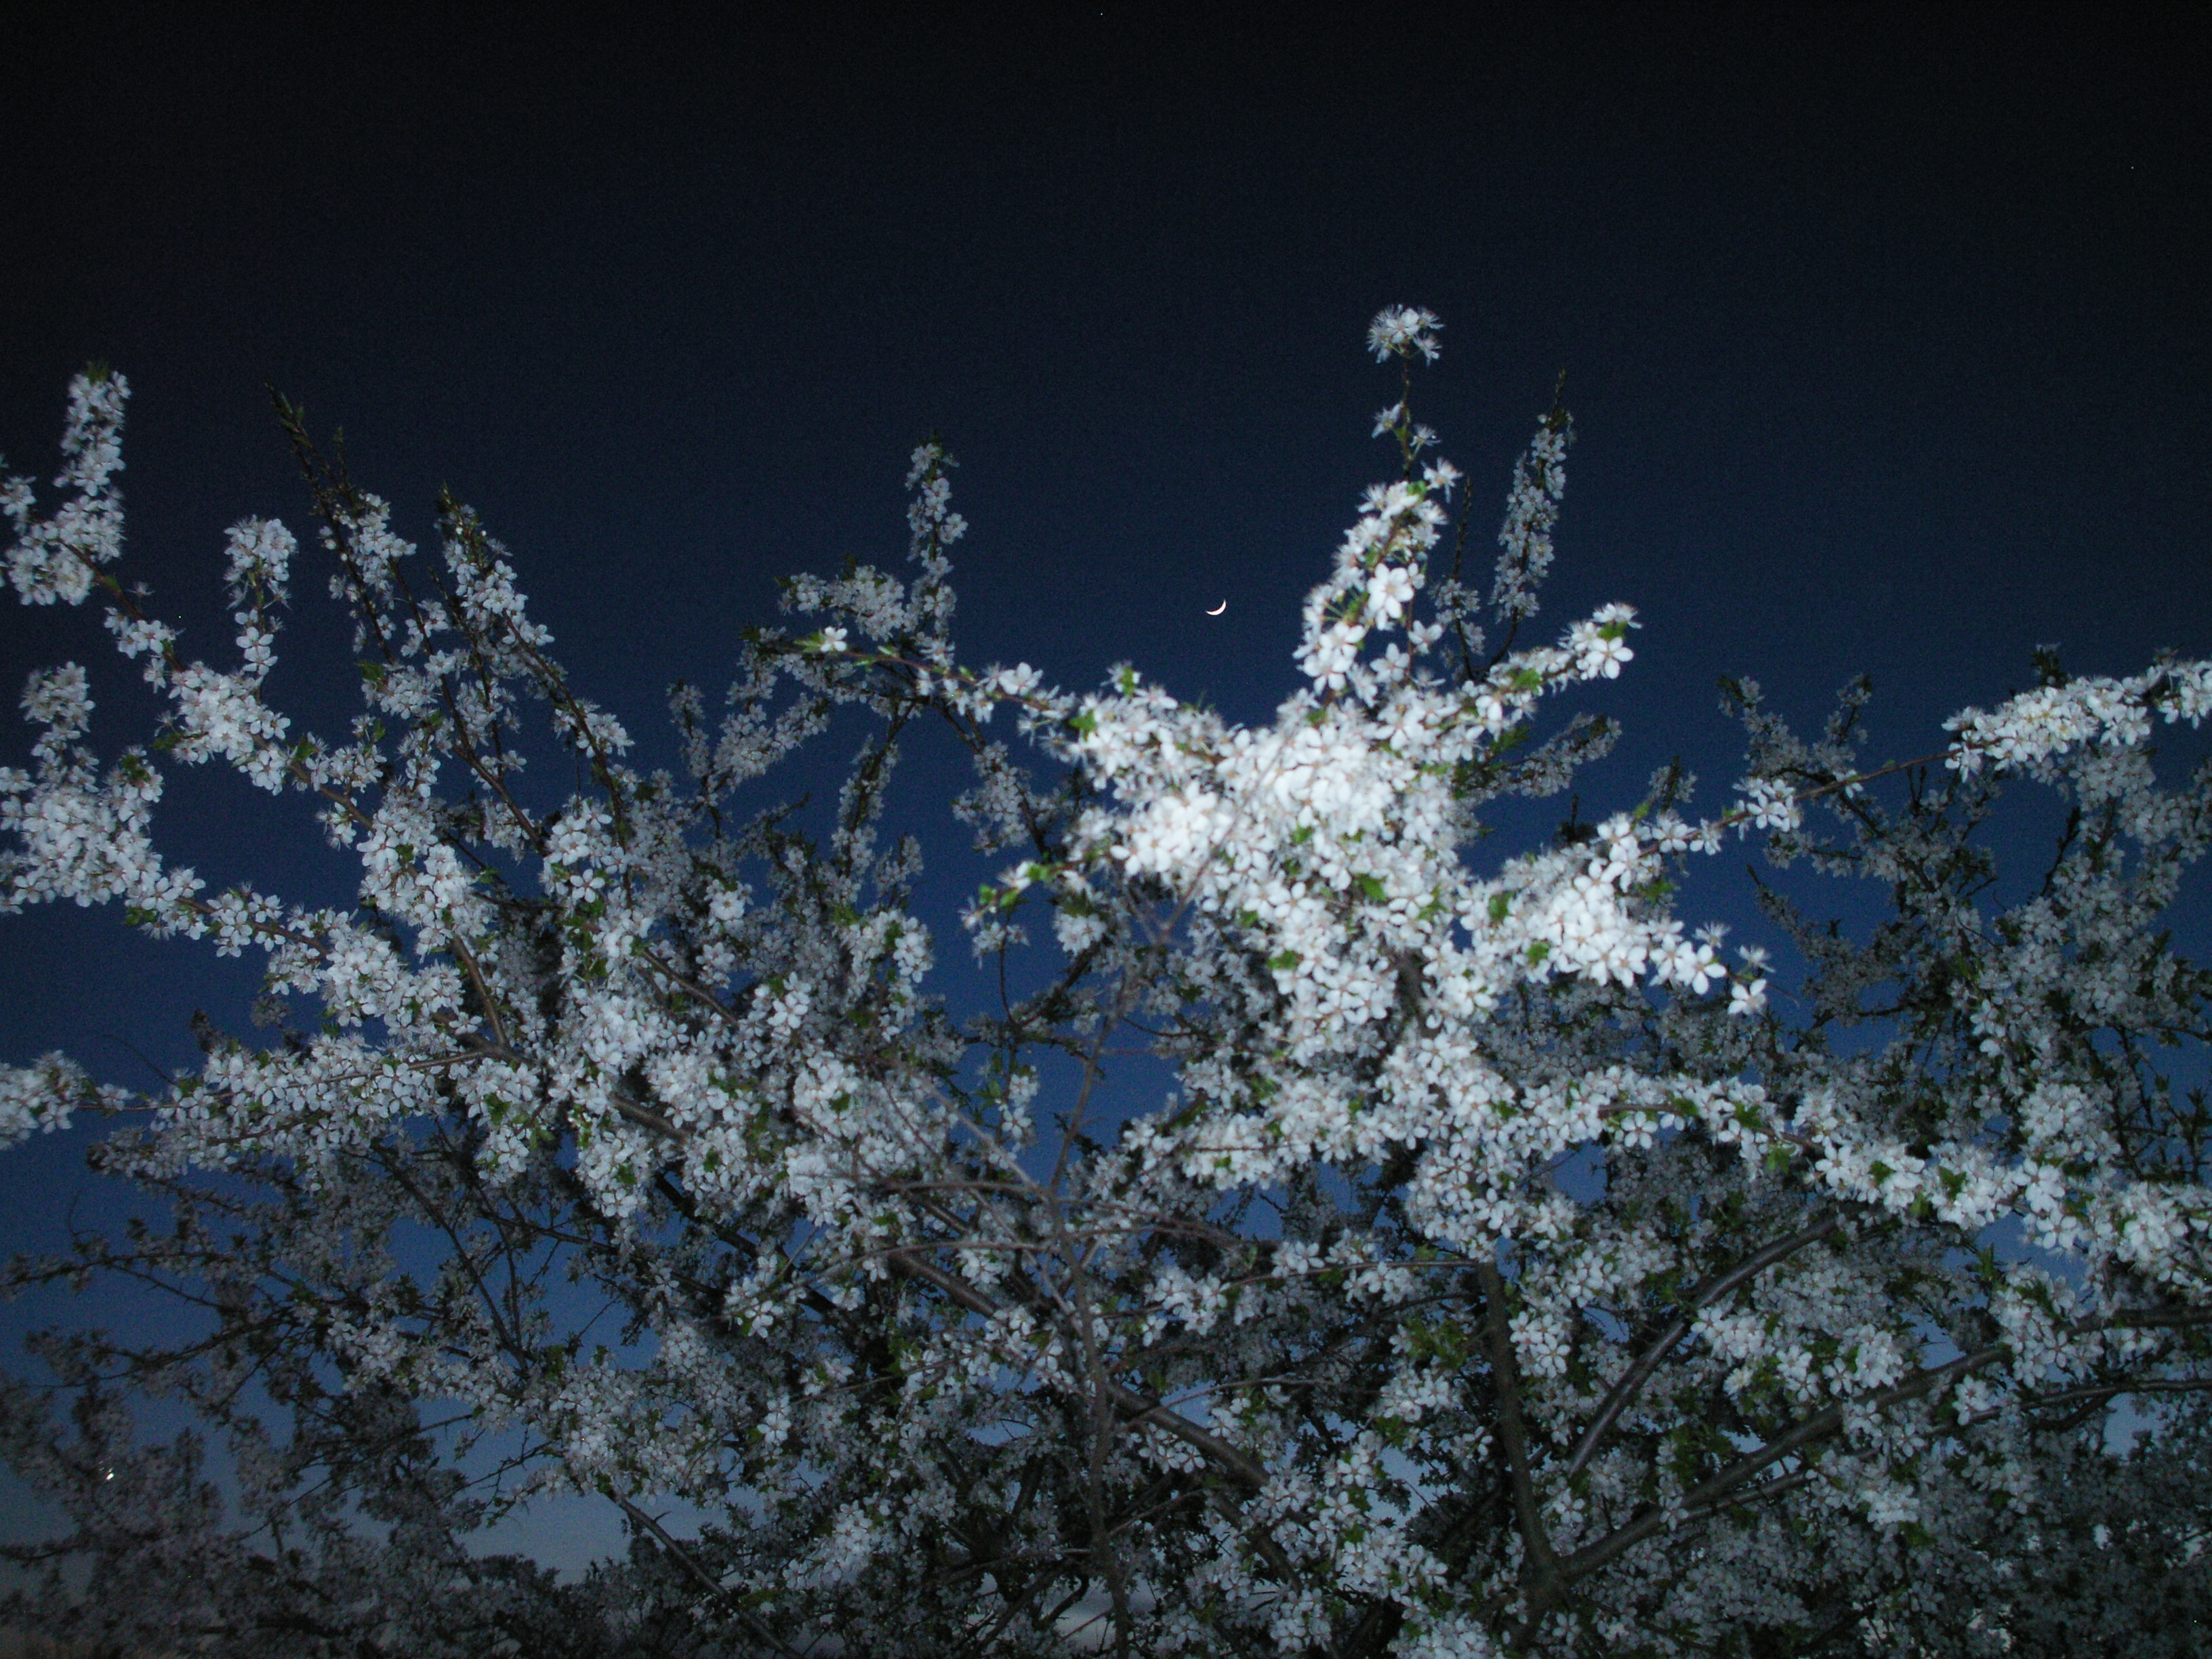 General 3264x2448 nature forest flowers sky Moon spring night sky night evening